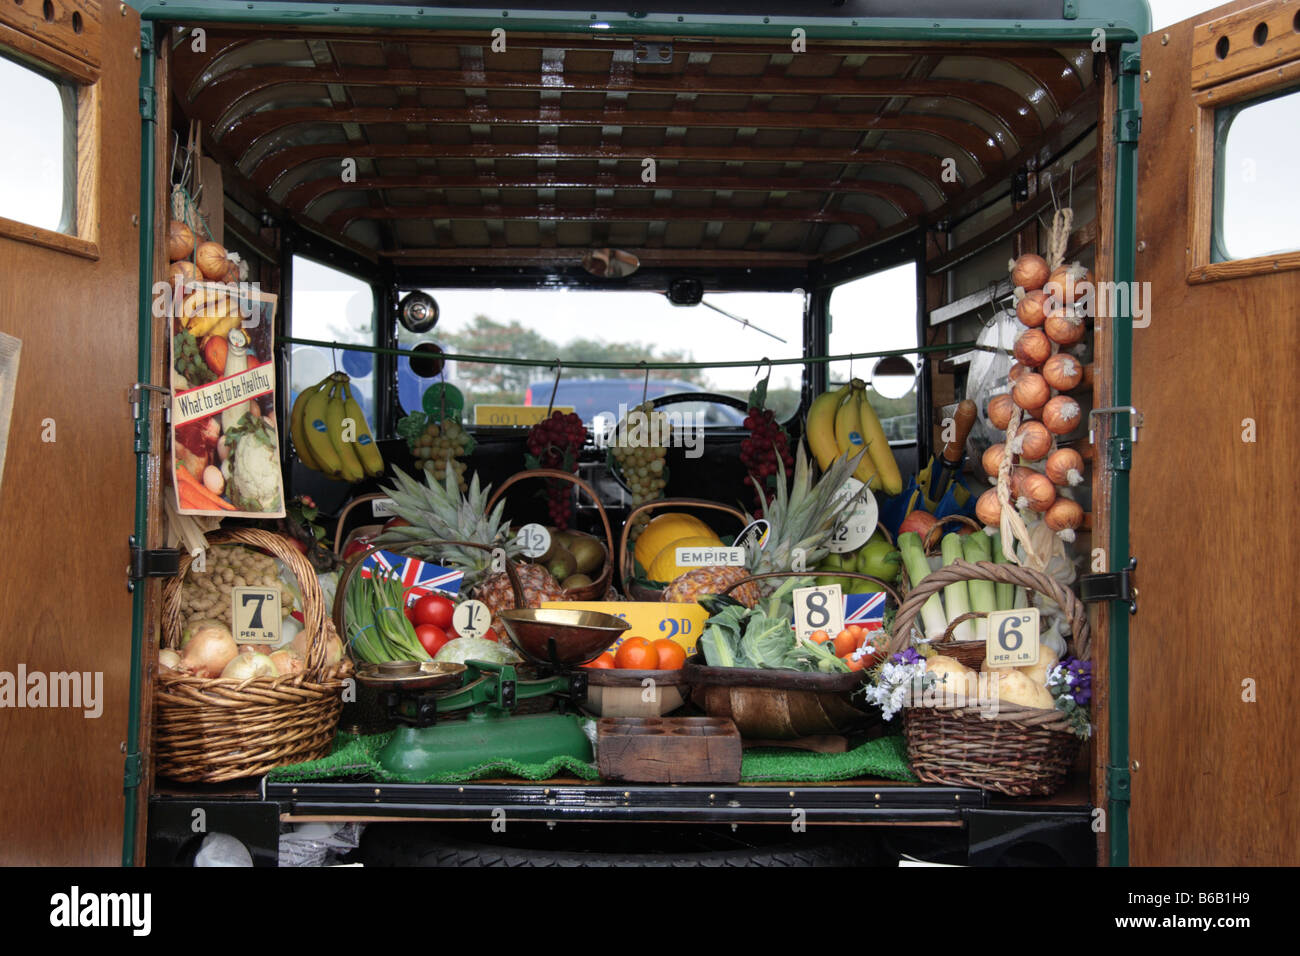 Display of Fruit and vegatables in back of travelling grocers van showing pre decimal prices Stock Photo